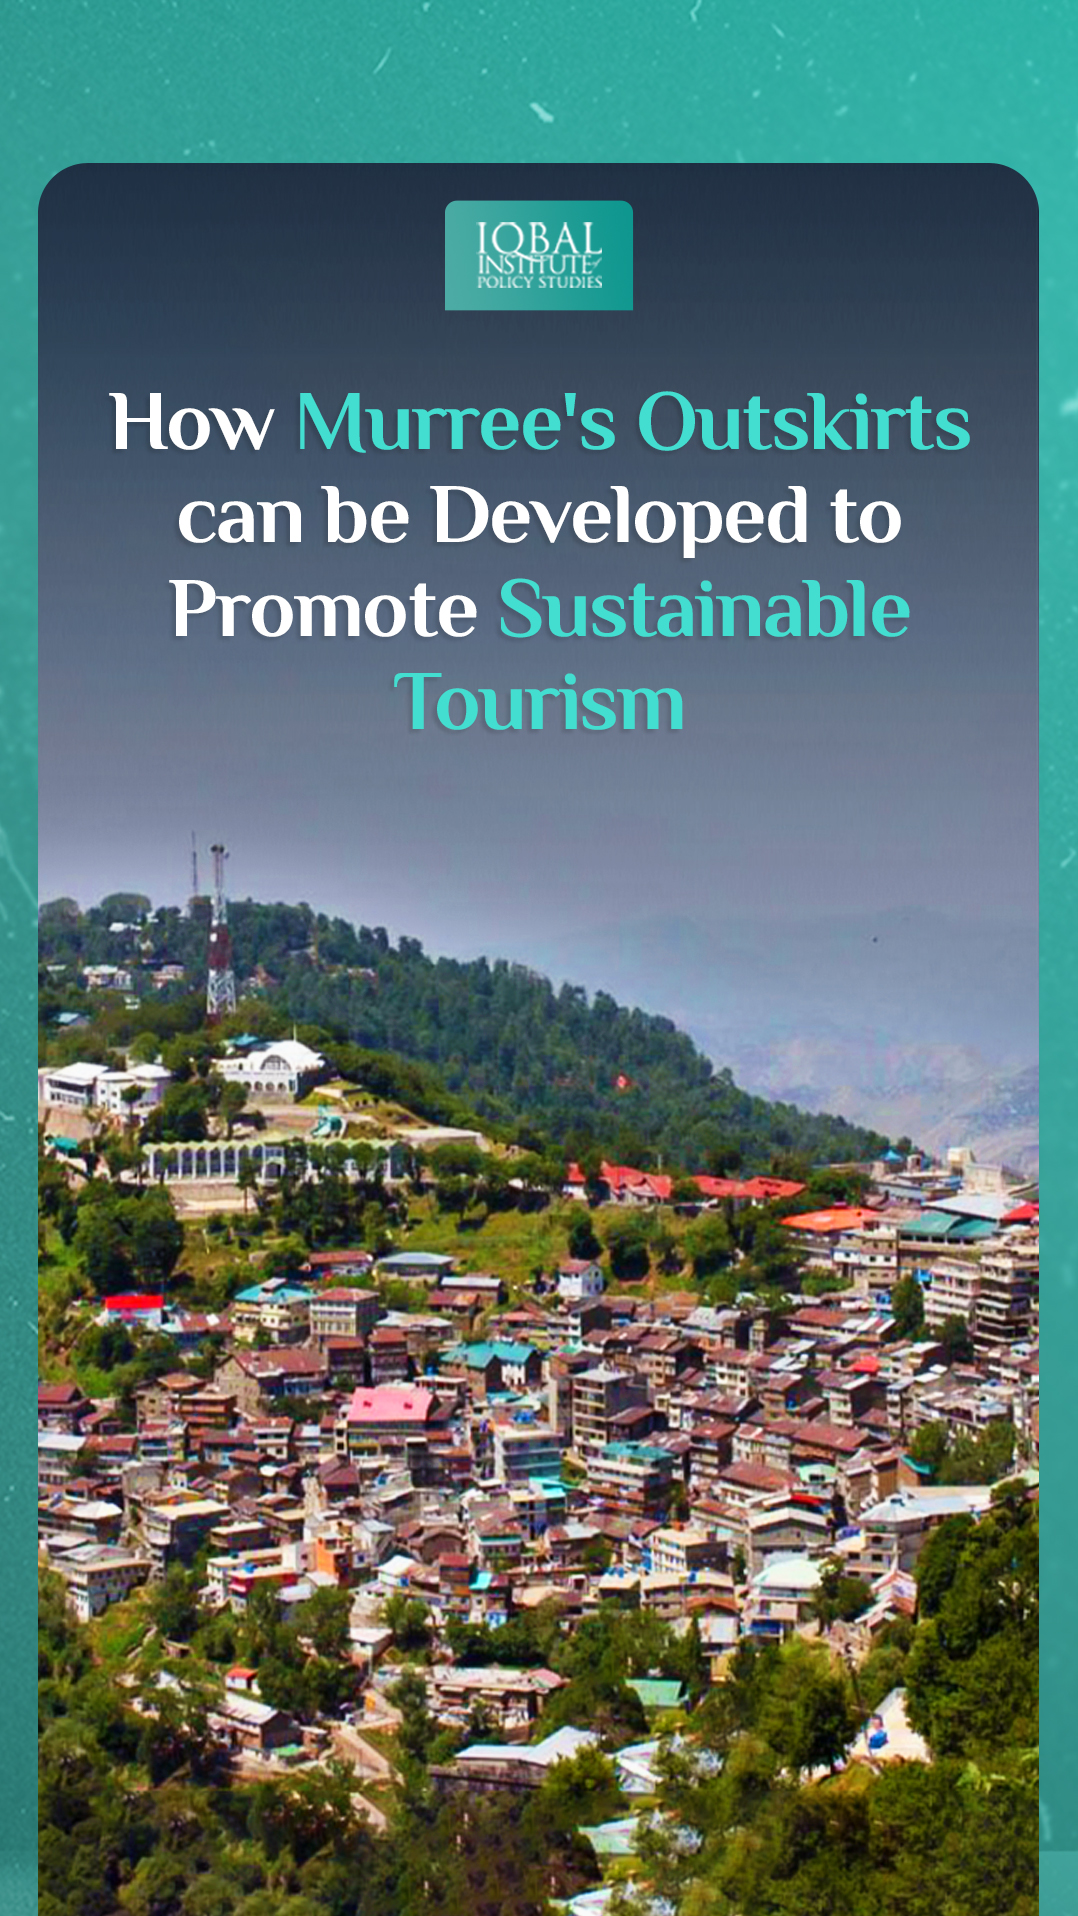 How Murree's Outskirts can be developed to promote sustainable Tourism